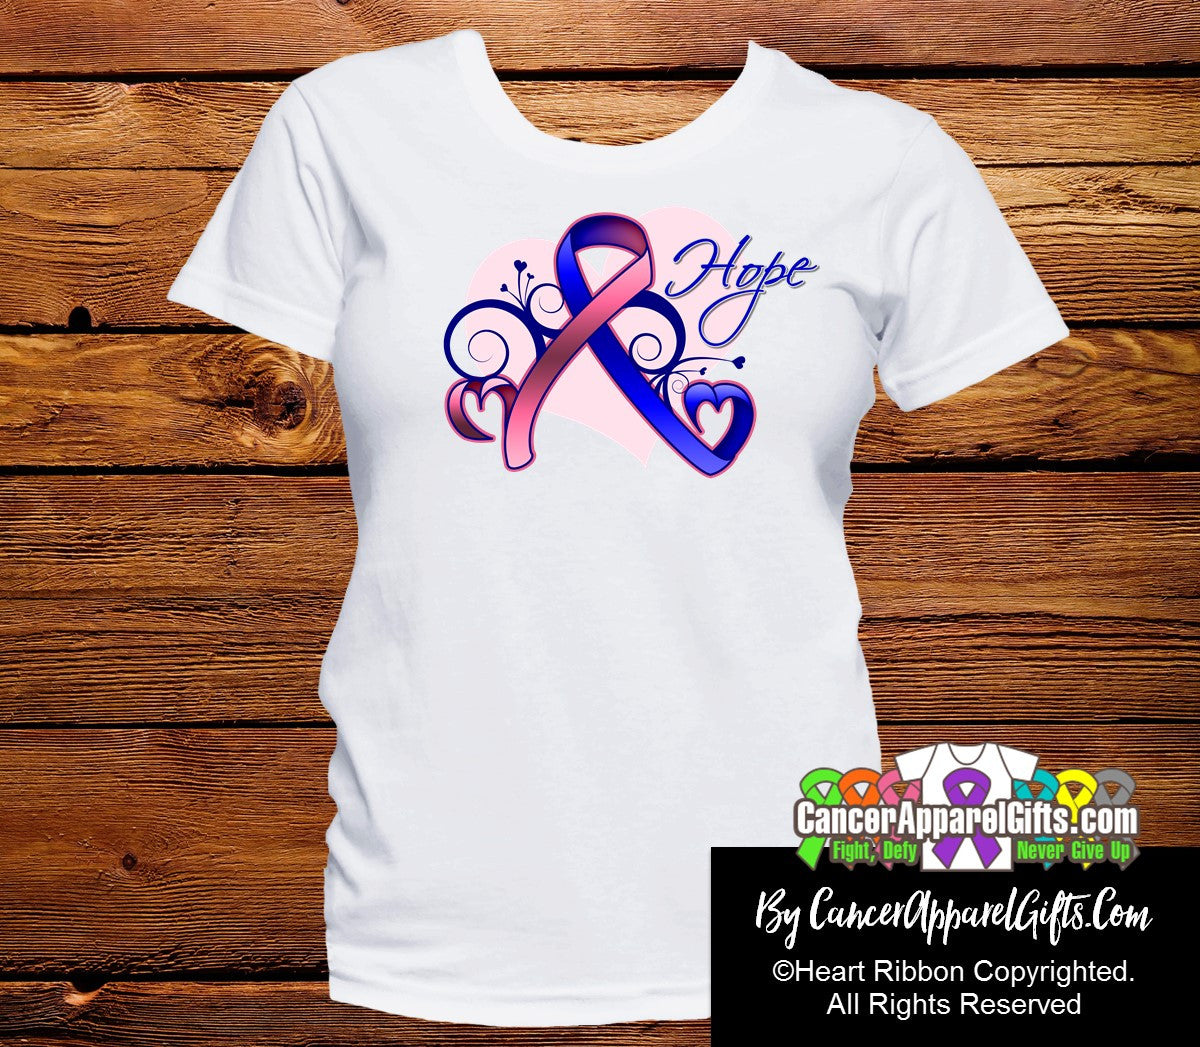 Male Breast Cancer Heart of Hope Ribbon Shirts - Cancer Apparel and Gifts